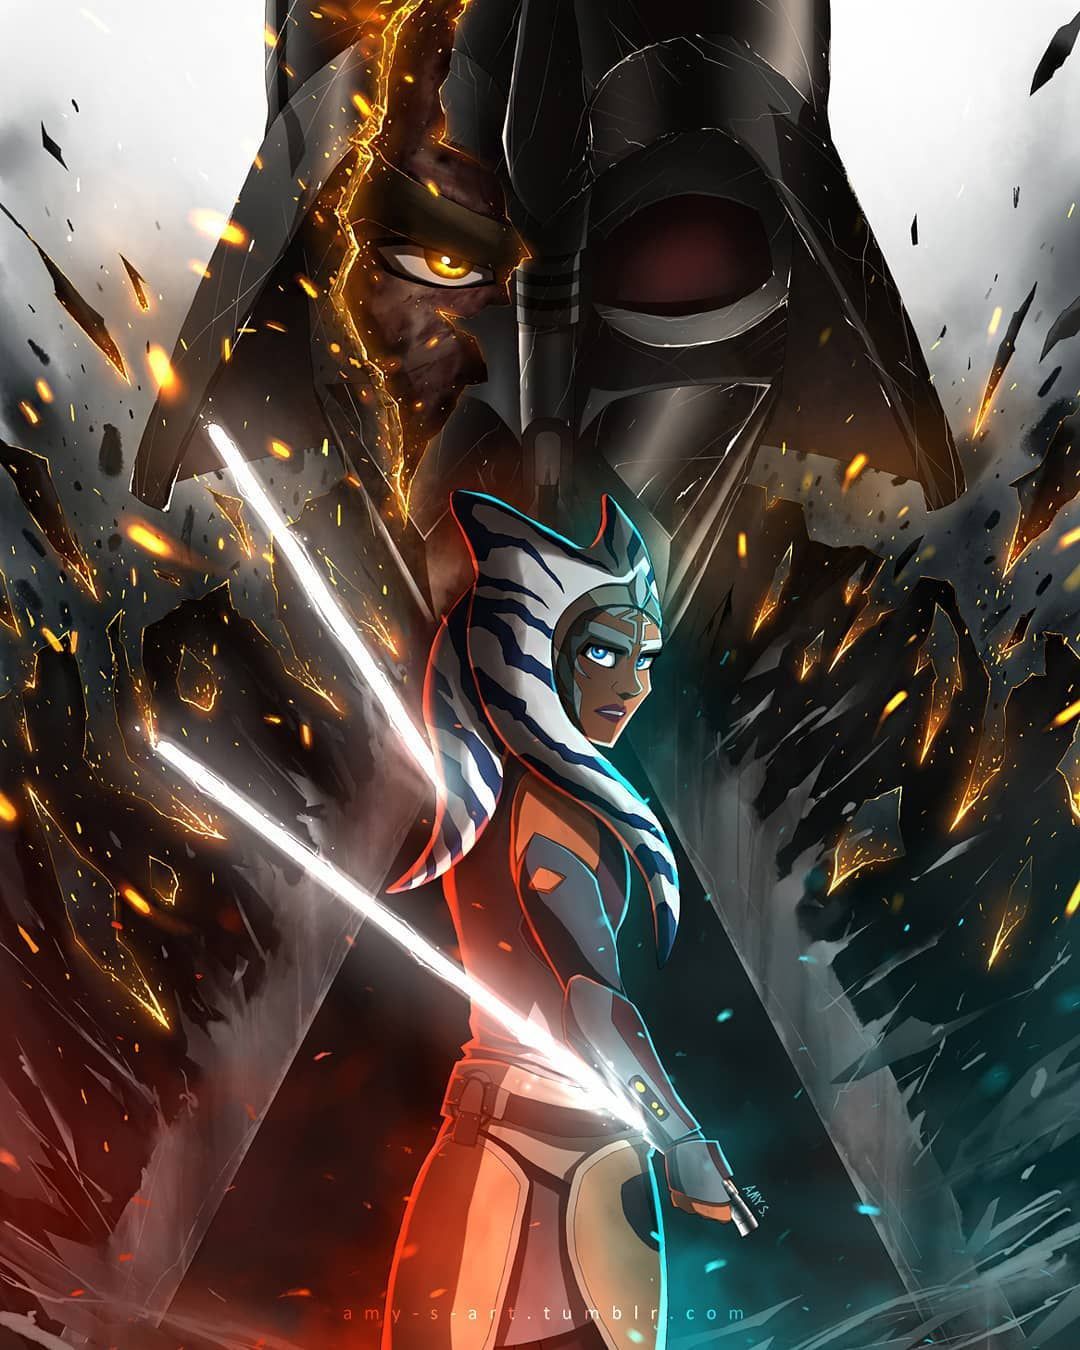 Star Wars Lore on Instagram: “Do you want to see more interactions between Darth Vader and Ahsoka Tano?. Star wars picture, Star wars ahsoka, Star wars drawings